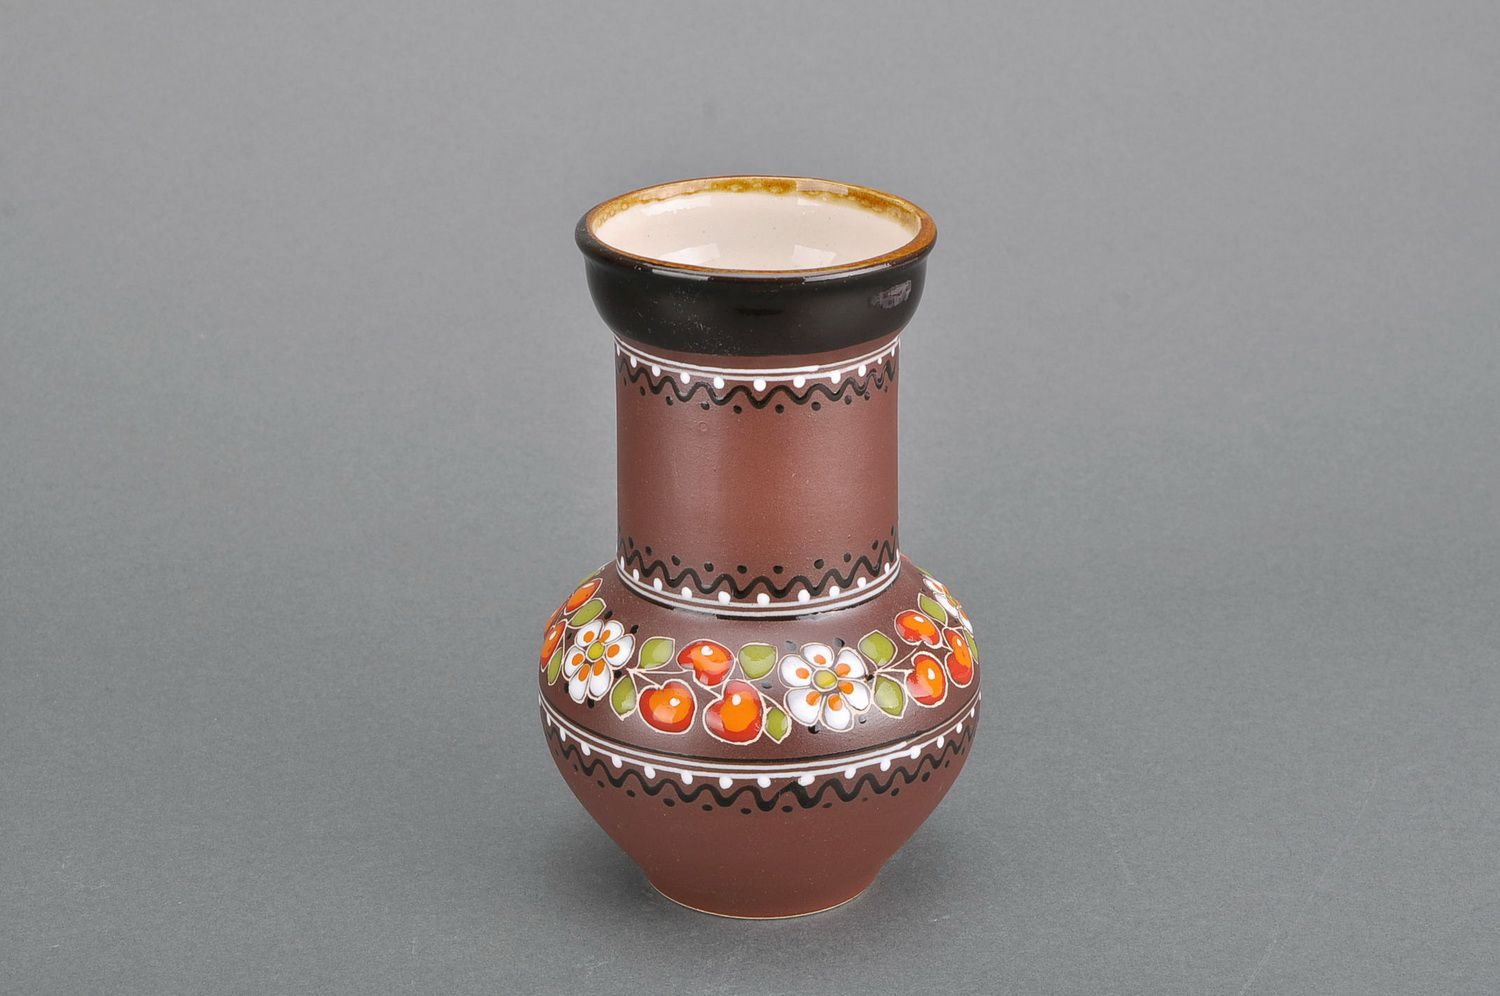 60 oz ceramic milk pitcher jug in brown color with ethnic decoration painting 1,2 lb photo 4